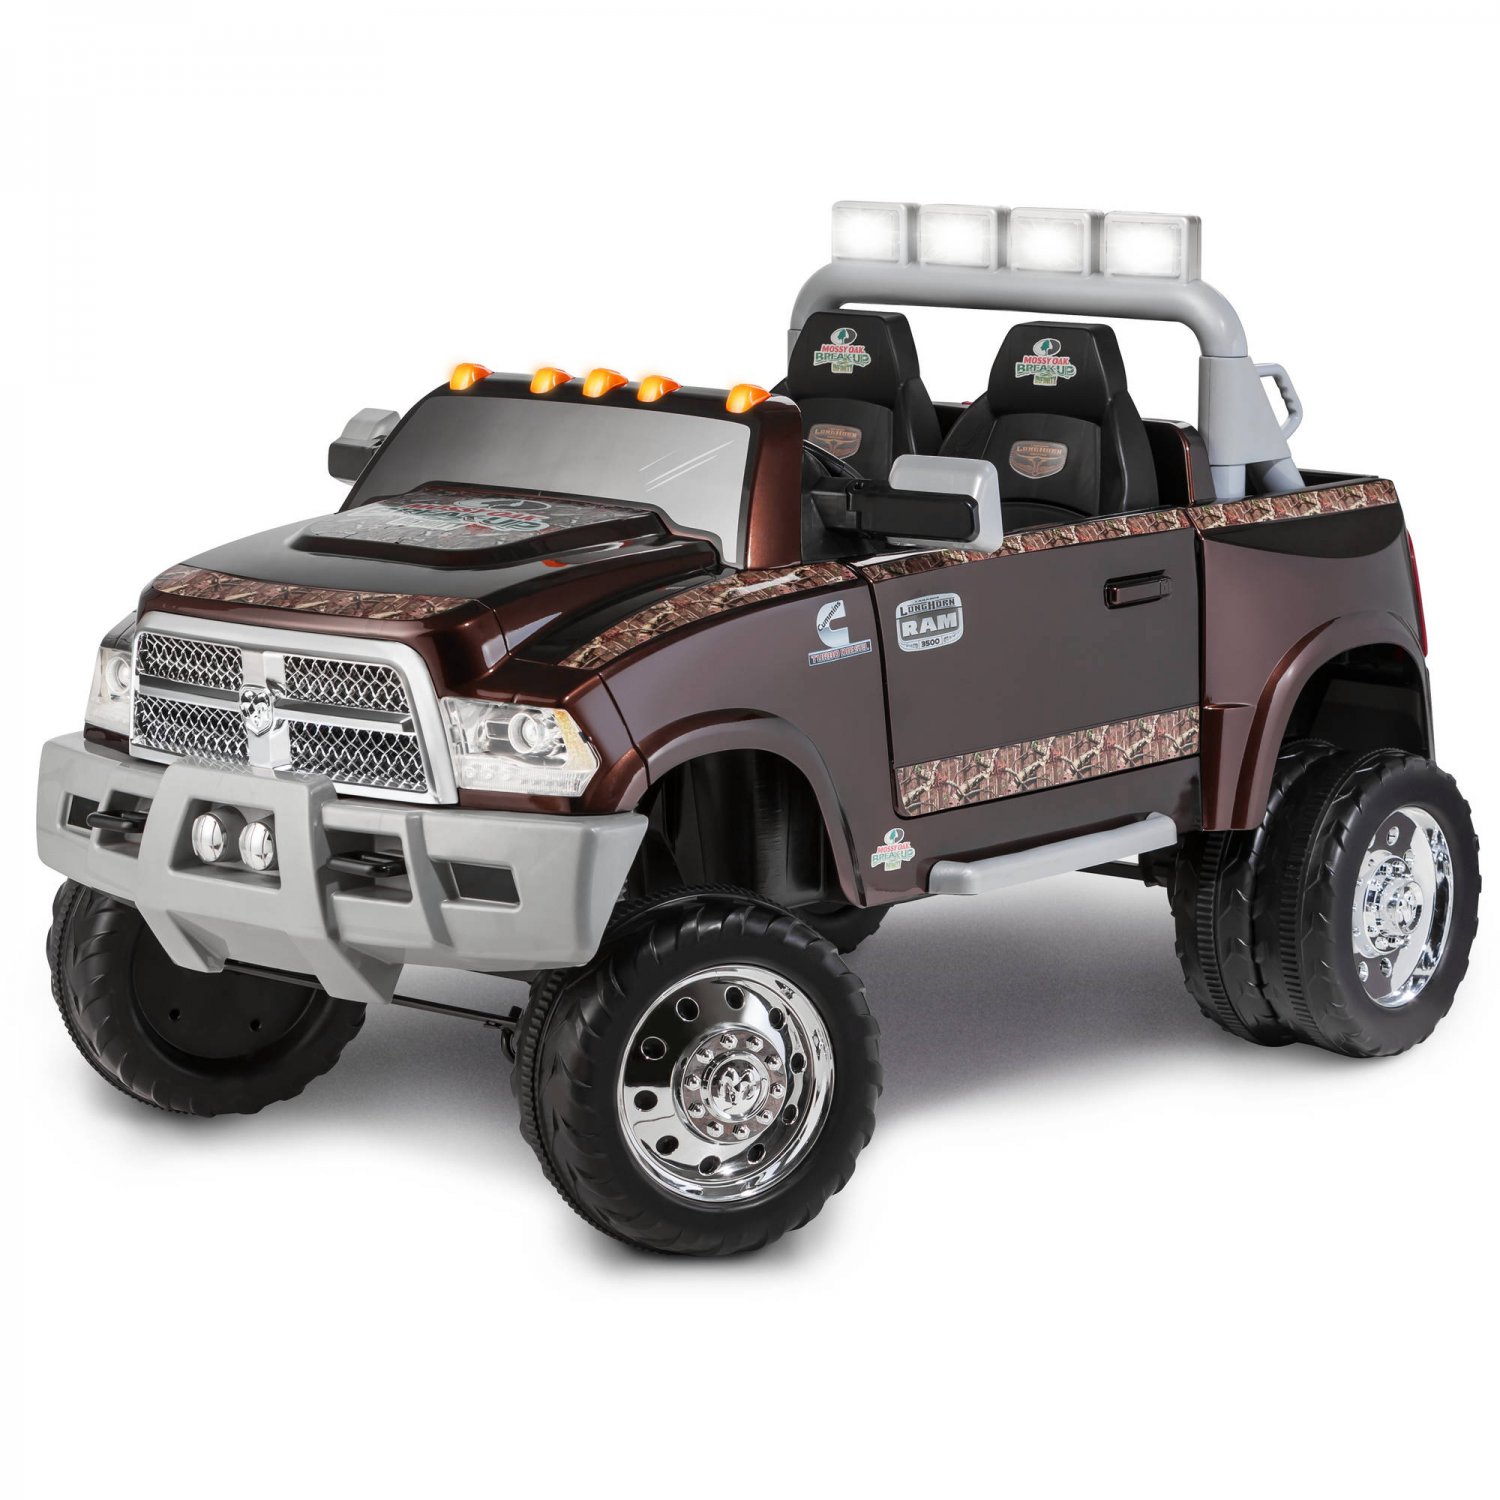 Built for kids who like to play hard, the Ram 3500 dually 12-volt battery-p...